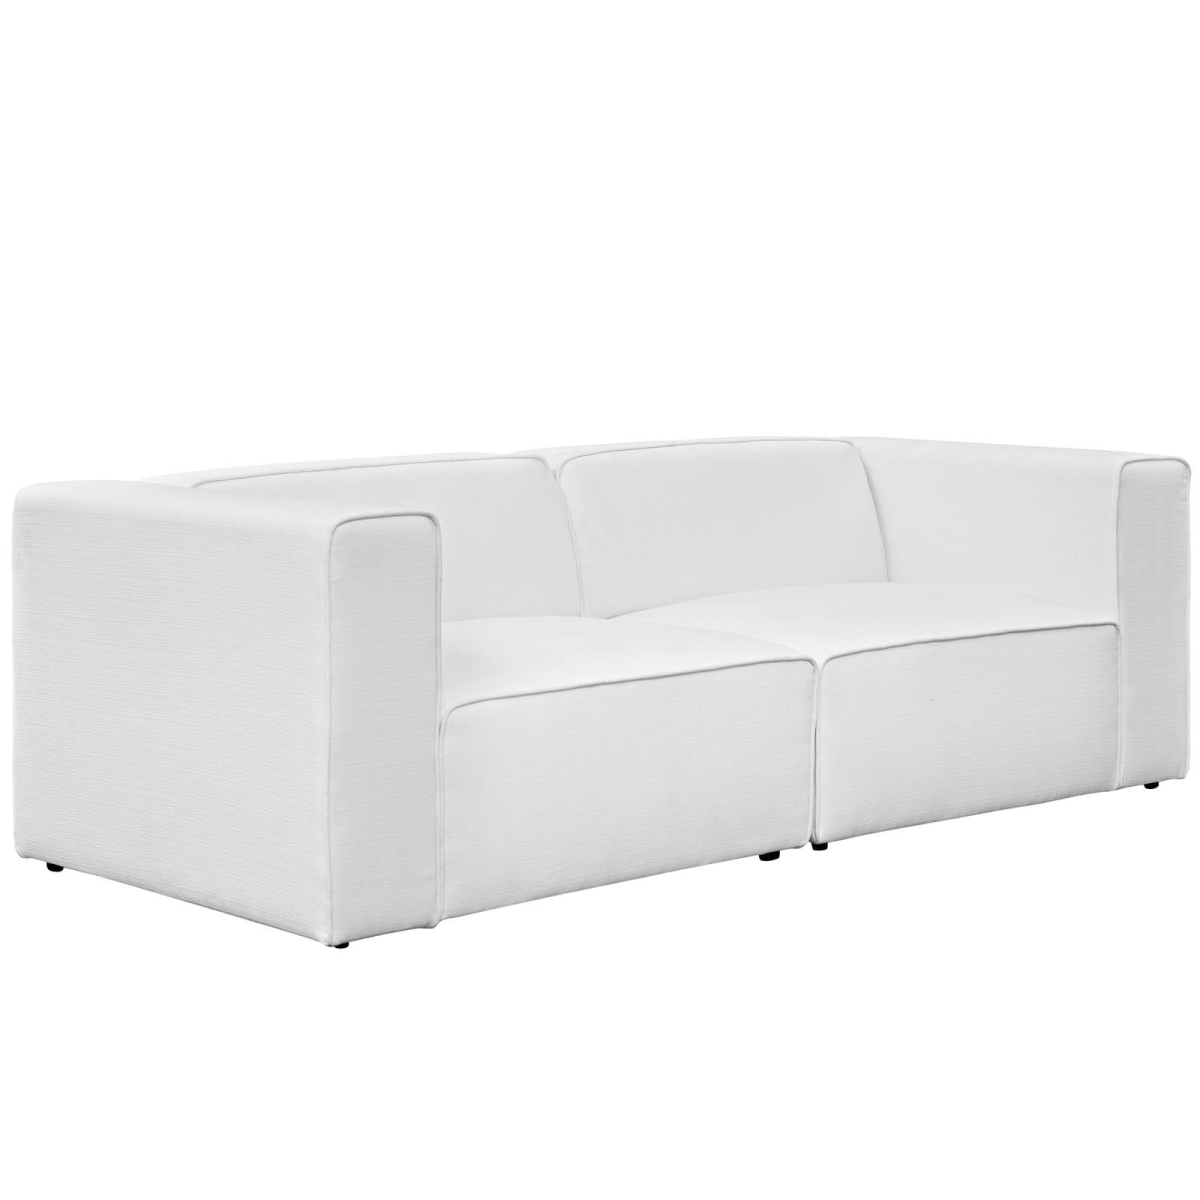 Eei-2825-whi 2 Piece Mingle Upholstered Fabric Sectional Sofa Set - White, 27 X 87 X 37 In.